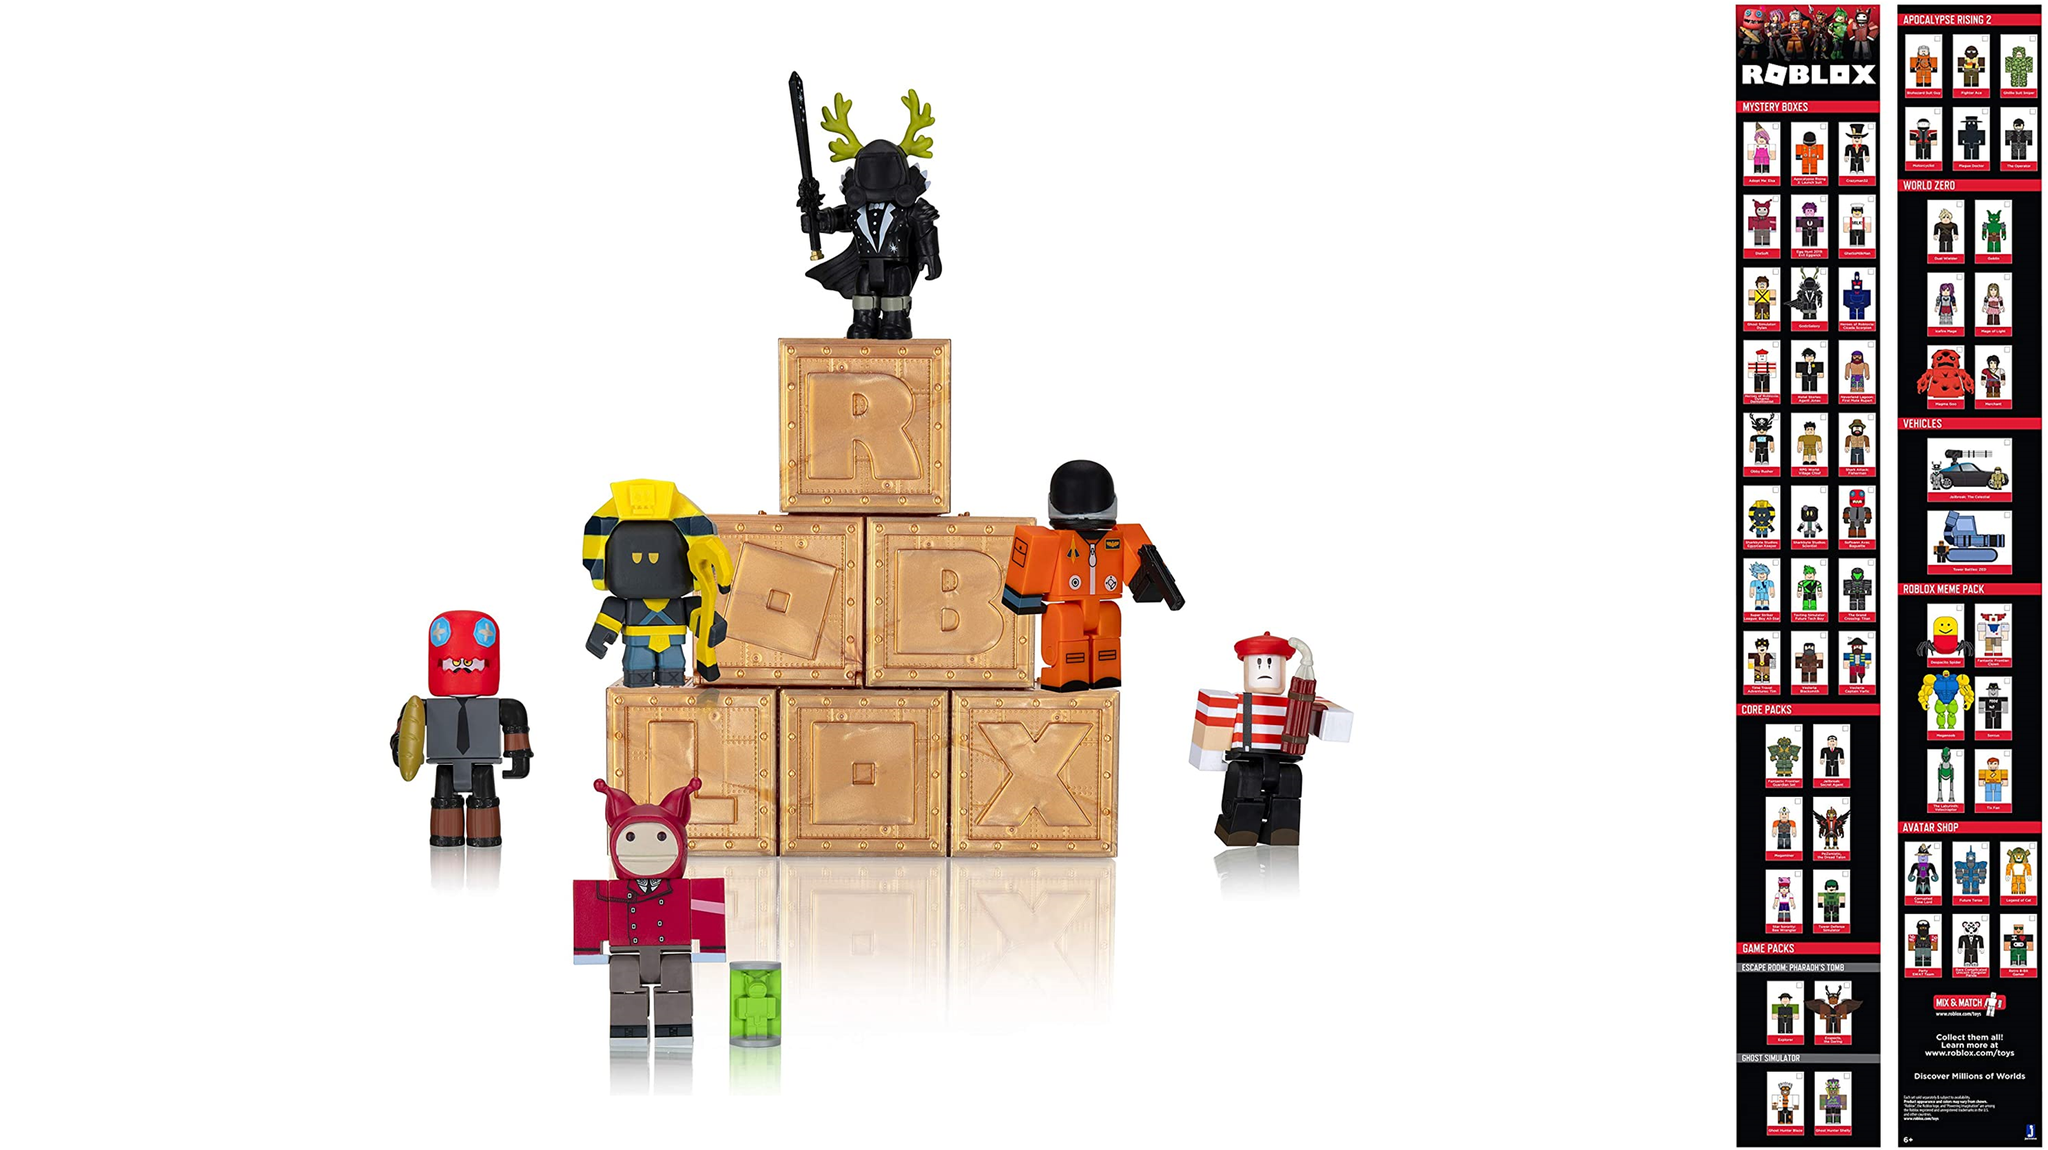 Bloxy News On Twitter For Those Interested In Collecting Robloxtoys Series 8 Of The Action Collection Mystery Boxes Are Now Available To Purchase On Amazon Https T Co E6kmdfydld Https T Co Bpoerep4sz - razer gold on twitter roblox series 3 mystery box toys